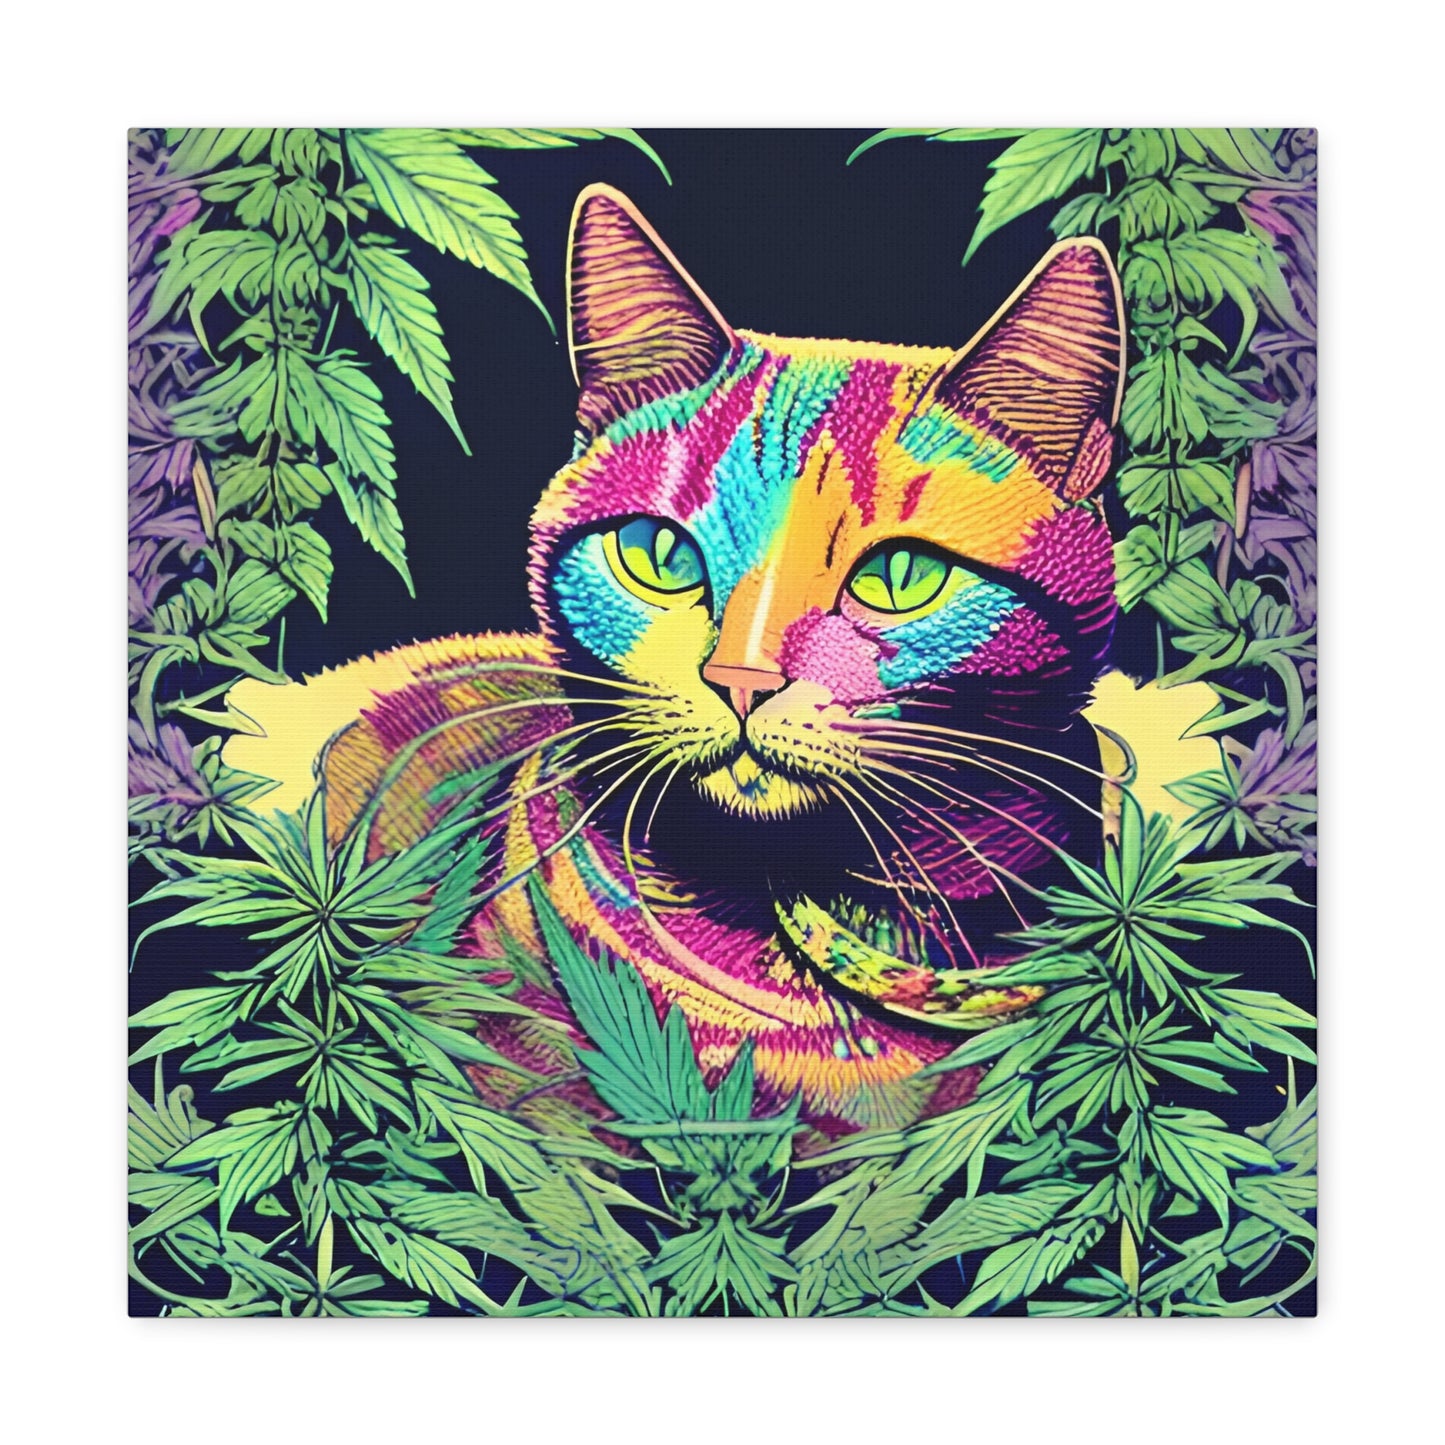 Cannabis Cat Wall Art No. 5 - Square 16" x 16" Canvas Wall Art Gift  A Feline Celebration of Nature and Joy!